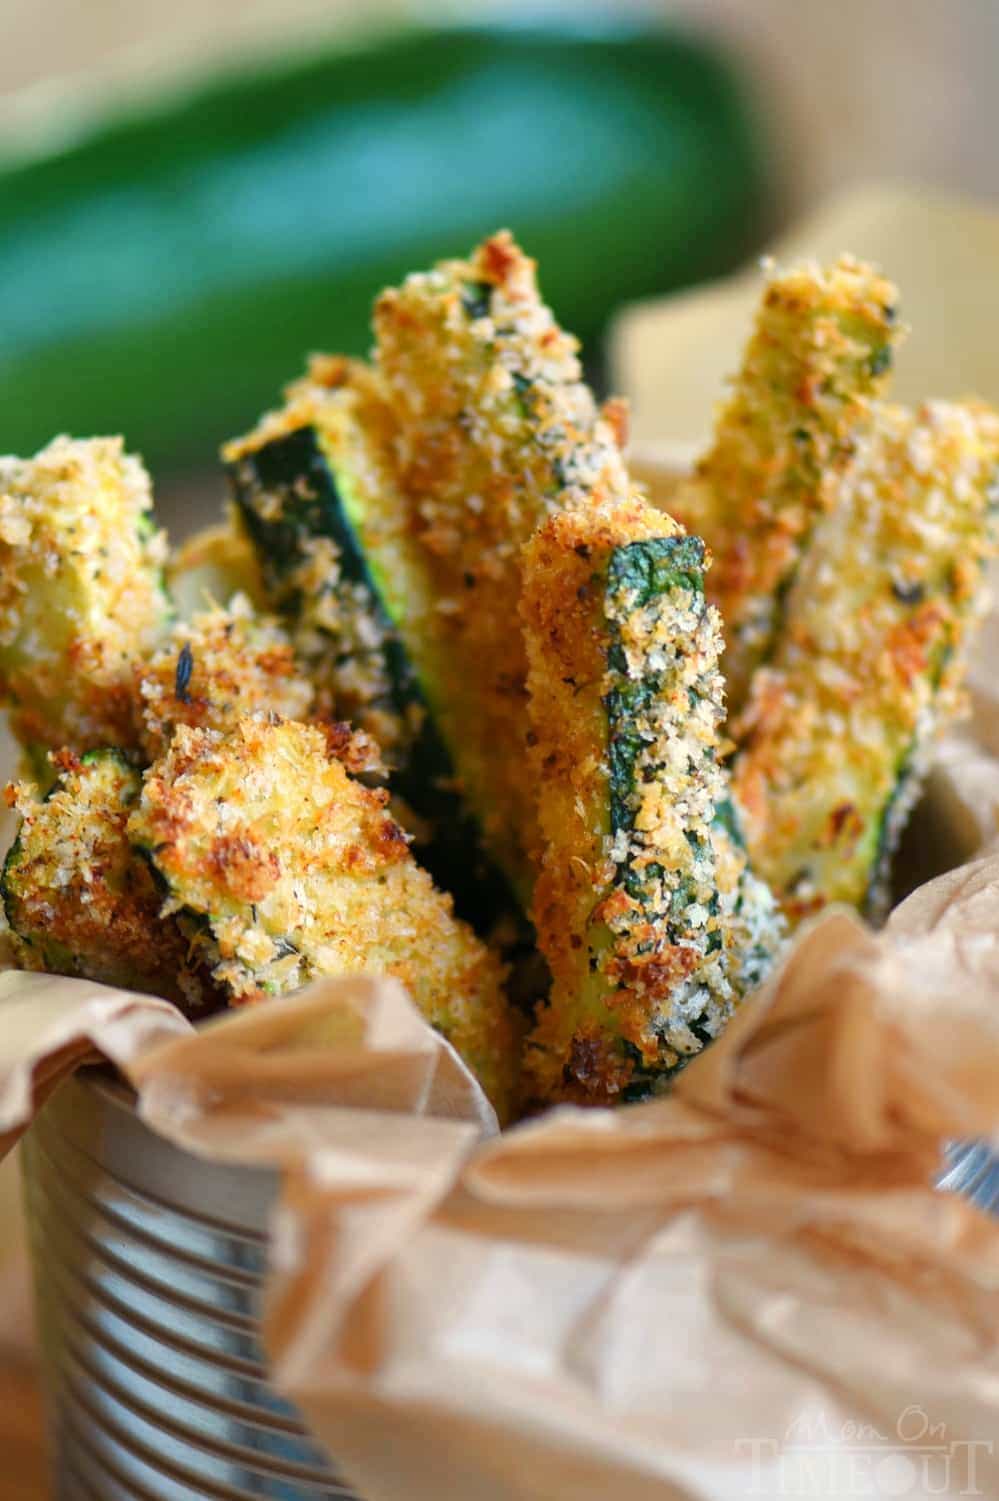 Your new favorite way to eat zucchini! These Baked Parmesan Zucchini Fries are loaded with flavor and baked to golden perfection! The perfect way to use up your summer bounty! // Mom On Timeout